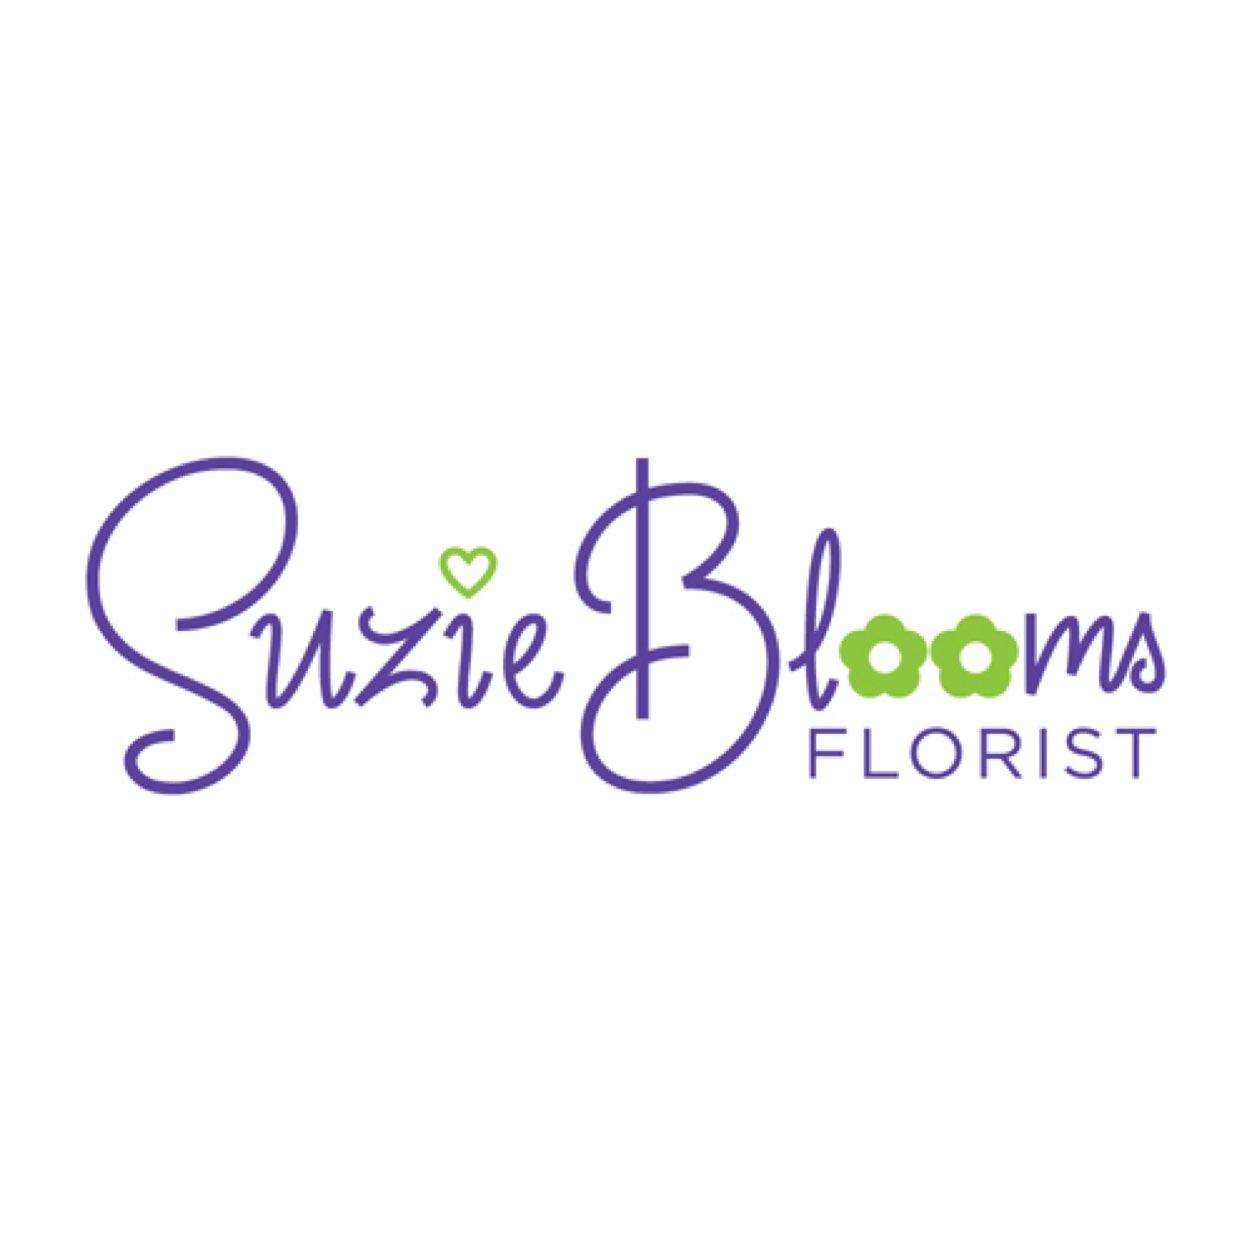 Flower shop by appointment only.
Weddings, events and funerals.
Suziebloomsflorist@gmail.com
07896972518.